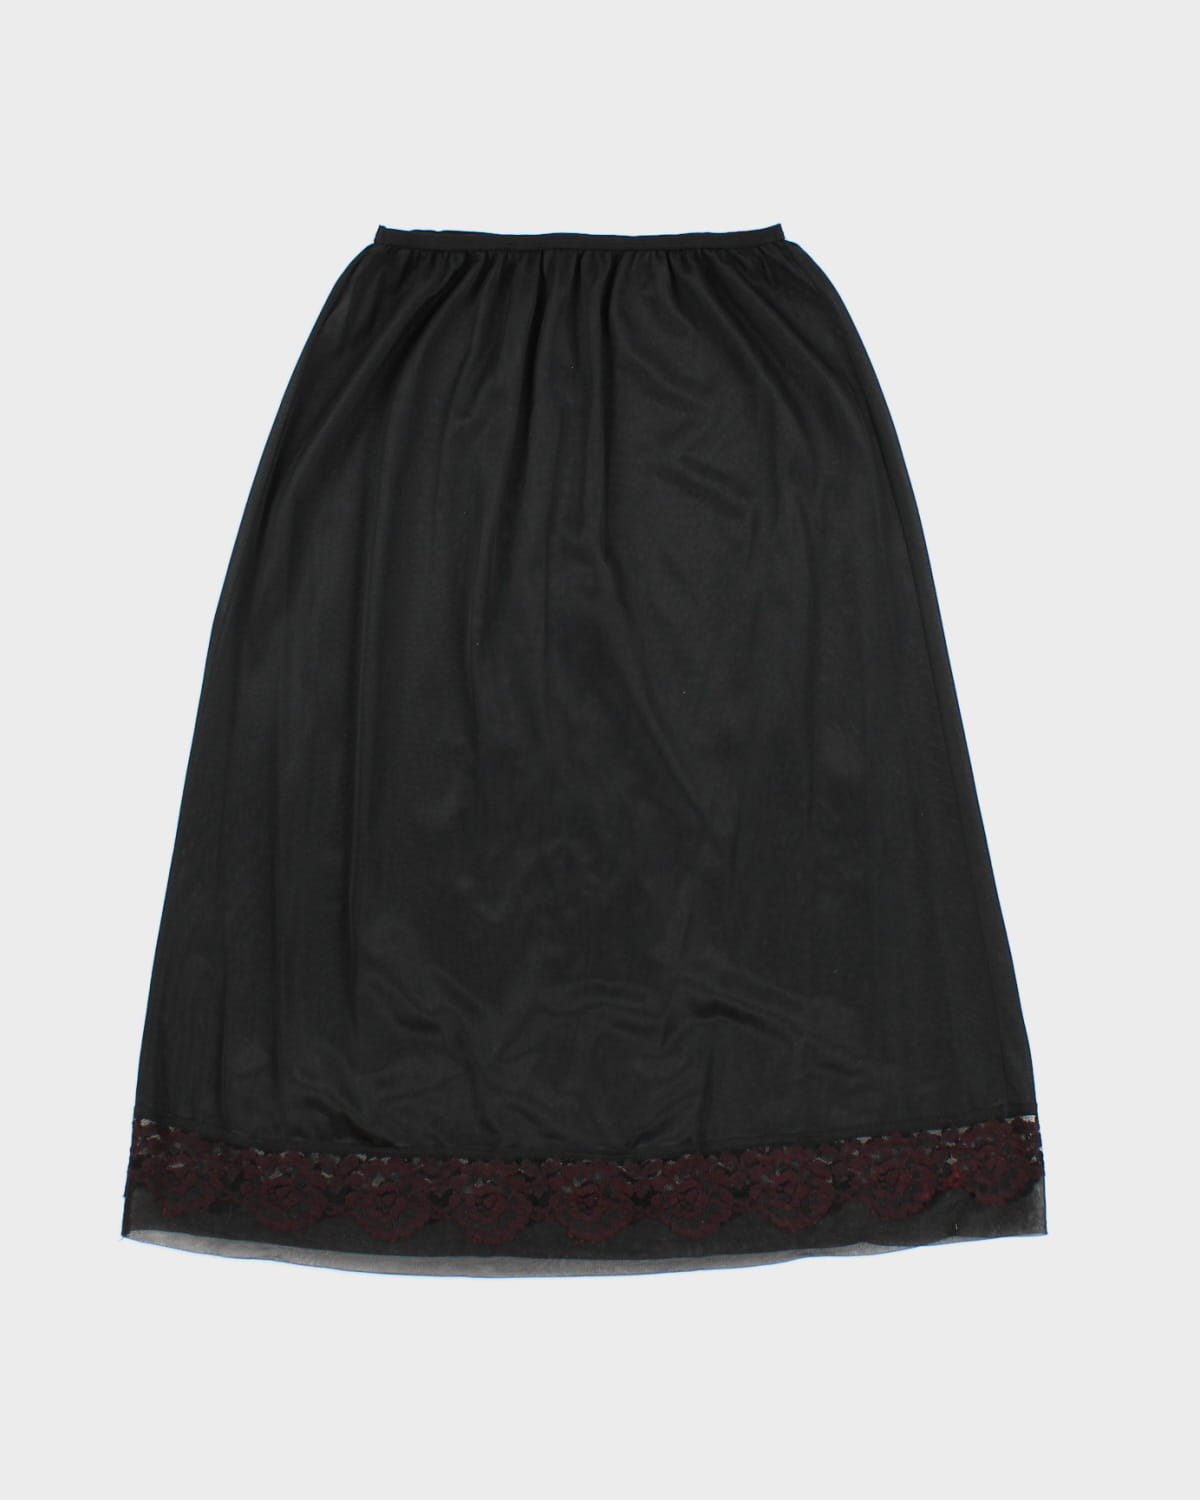 Vintage Lace Flower Embroidered Petticoat Slip Skirt - S